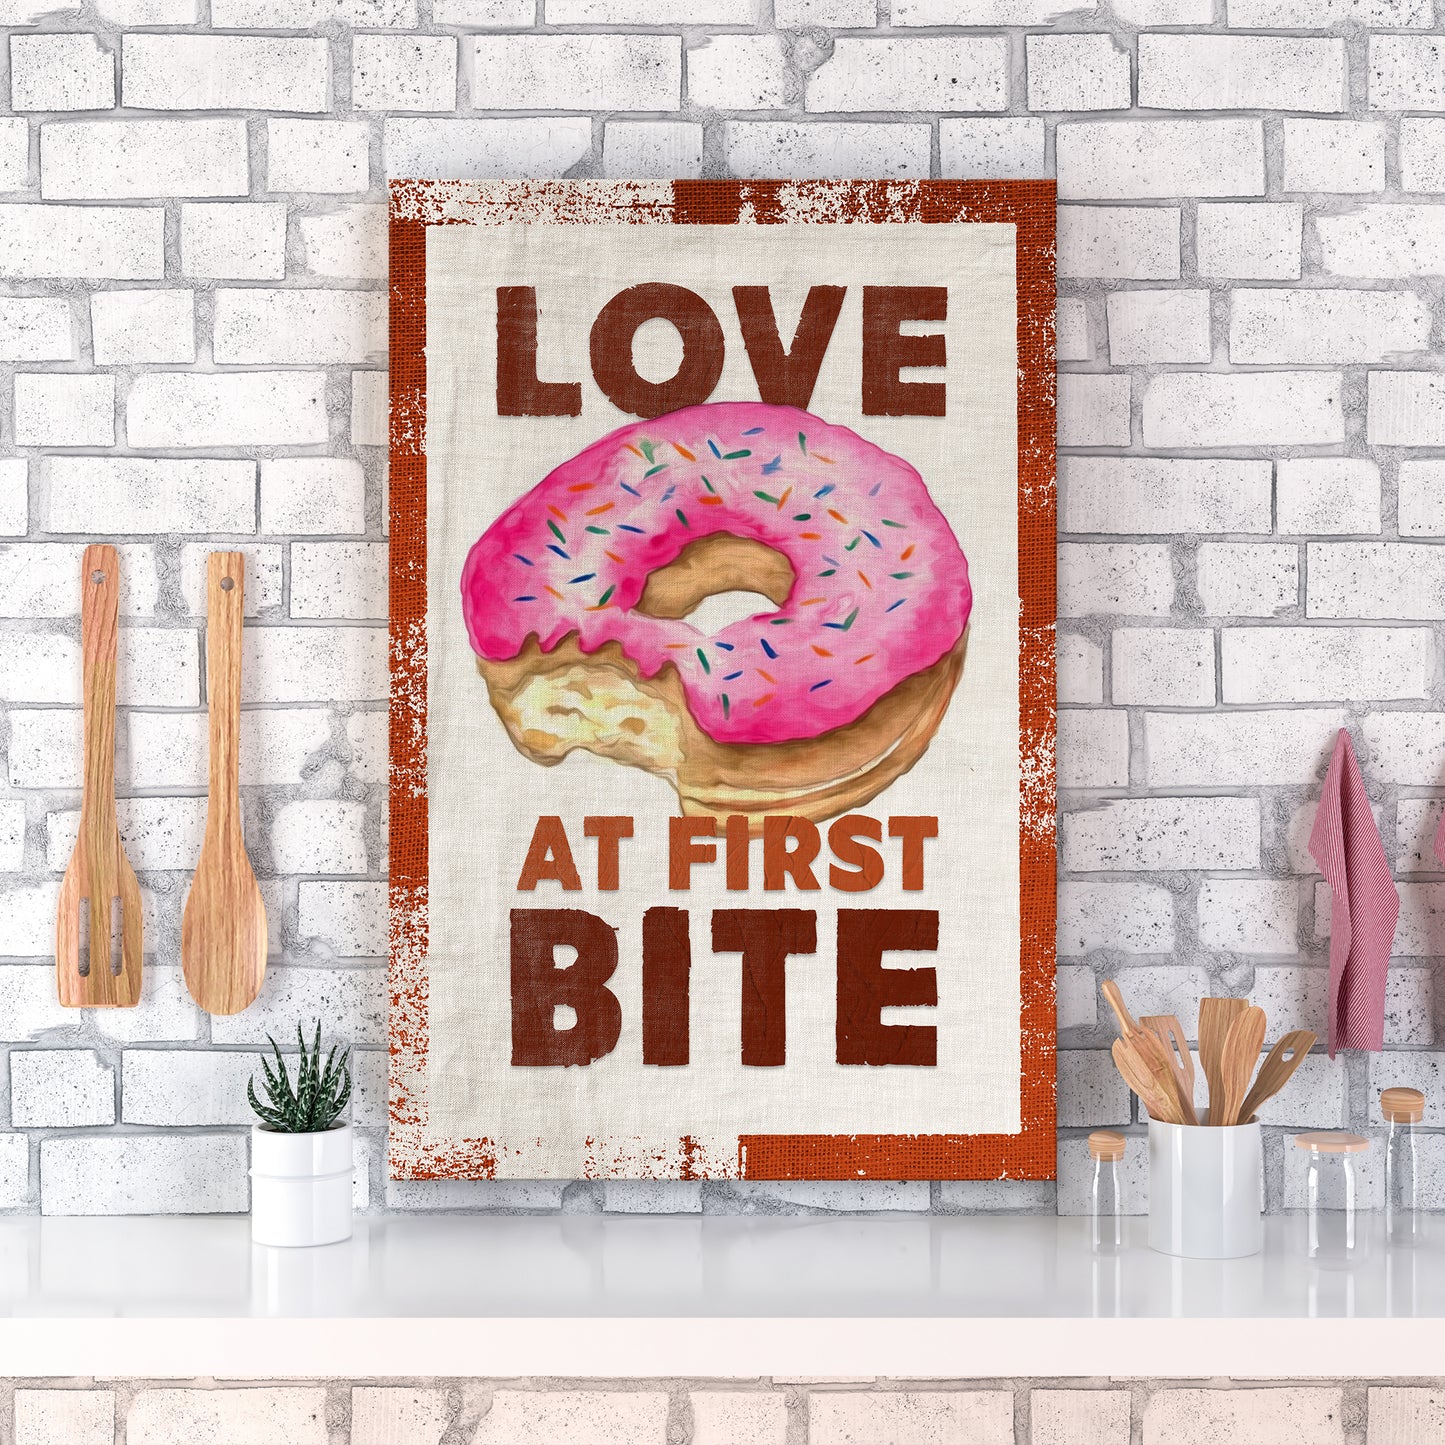 Love At First Bite Sign - Image by Tailored Canvases